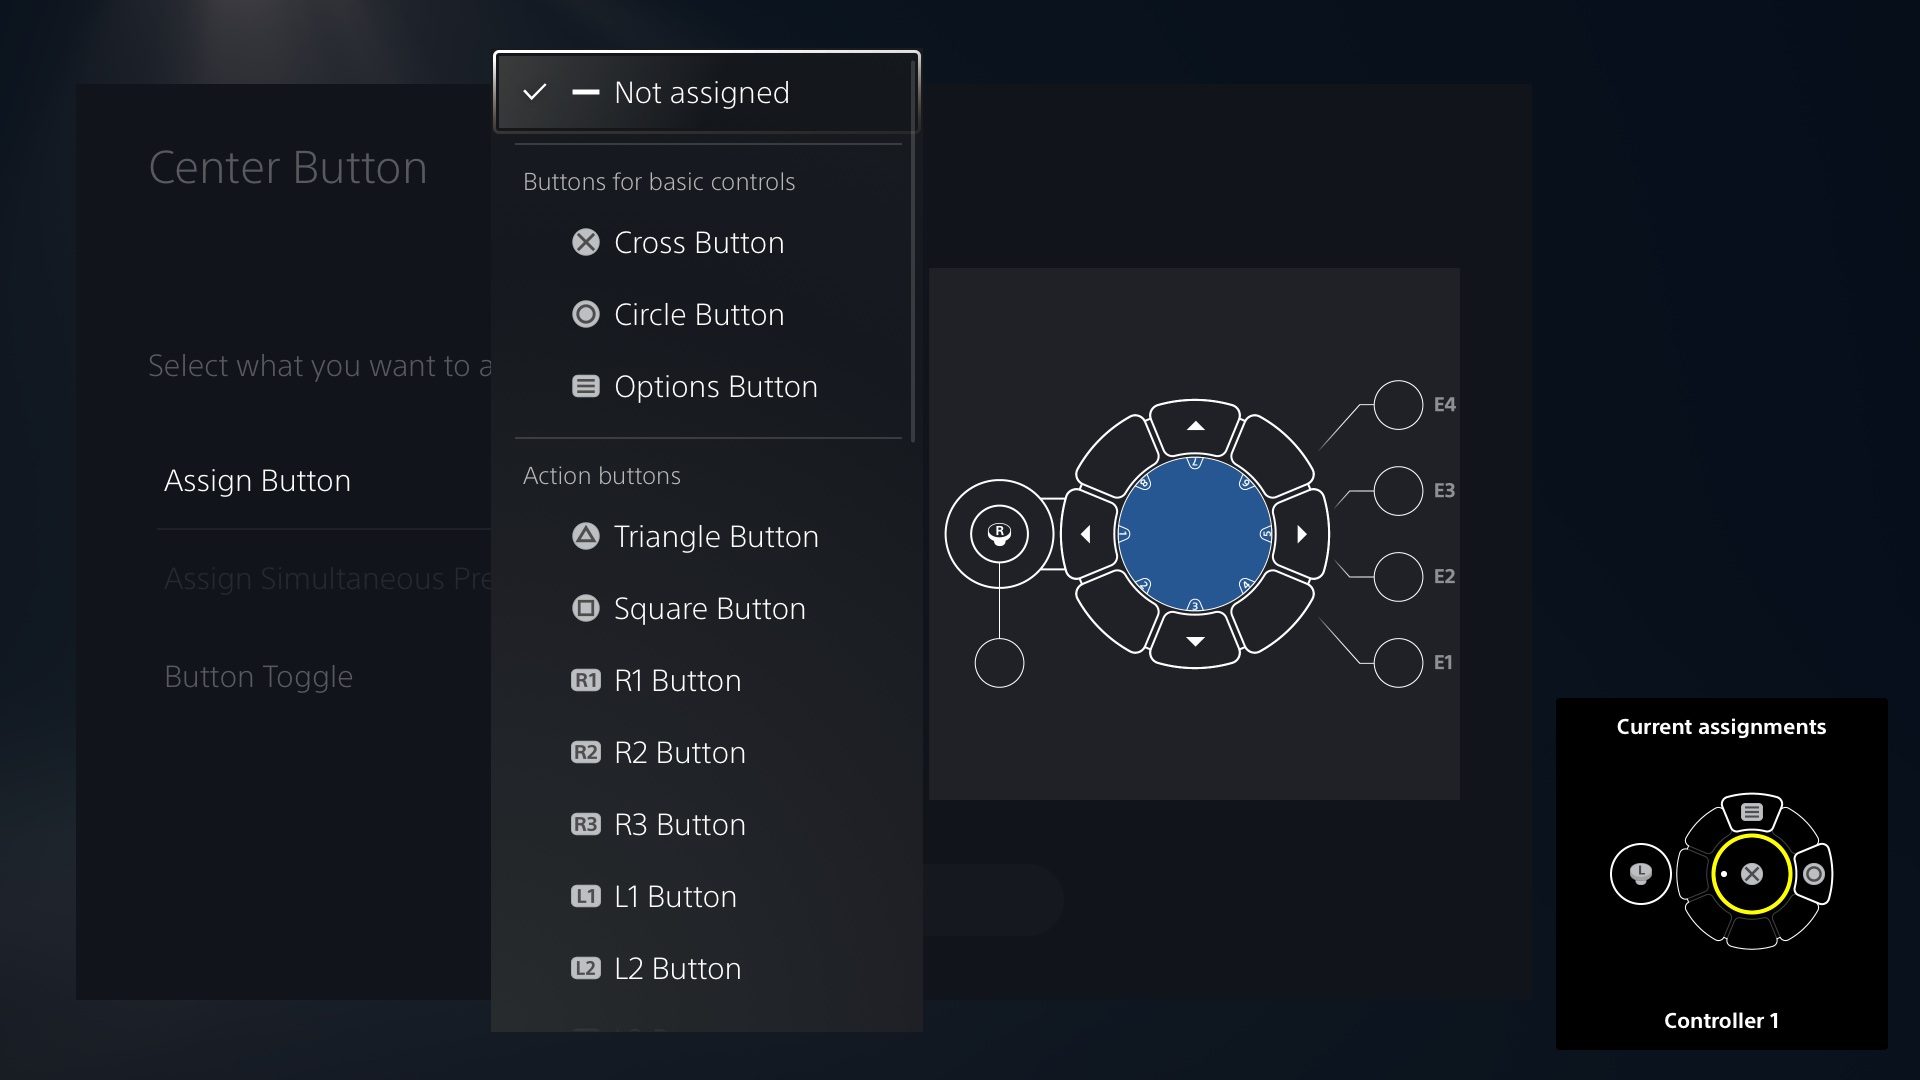 Image of an access controller user interface showing button assignment choices